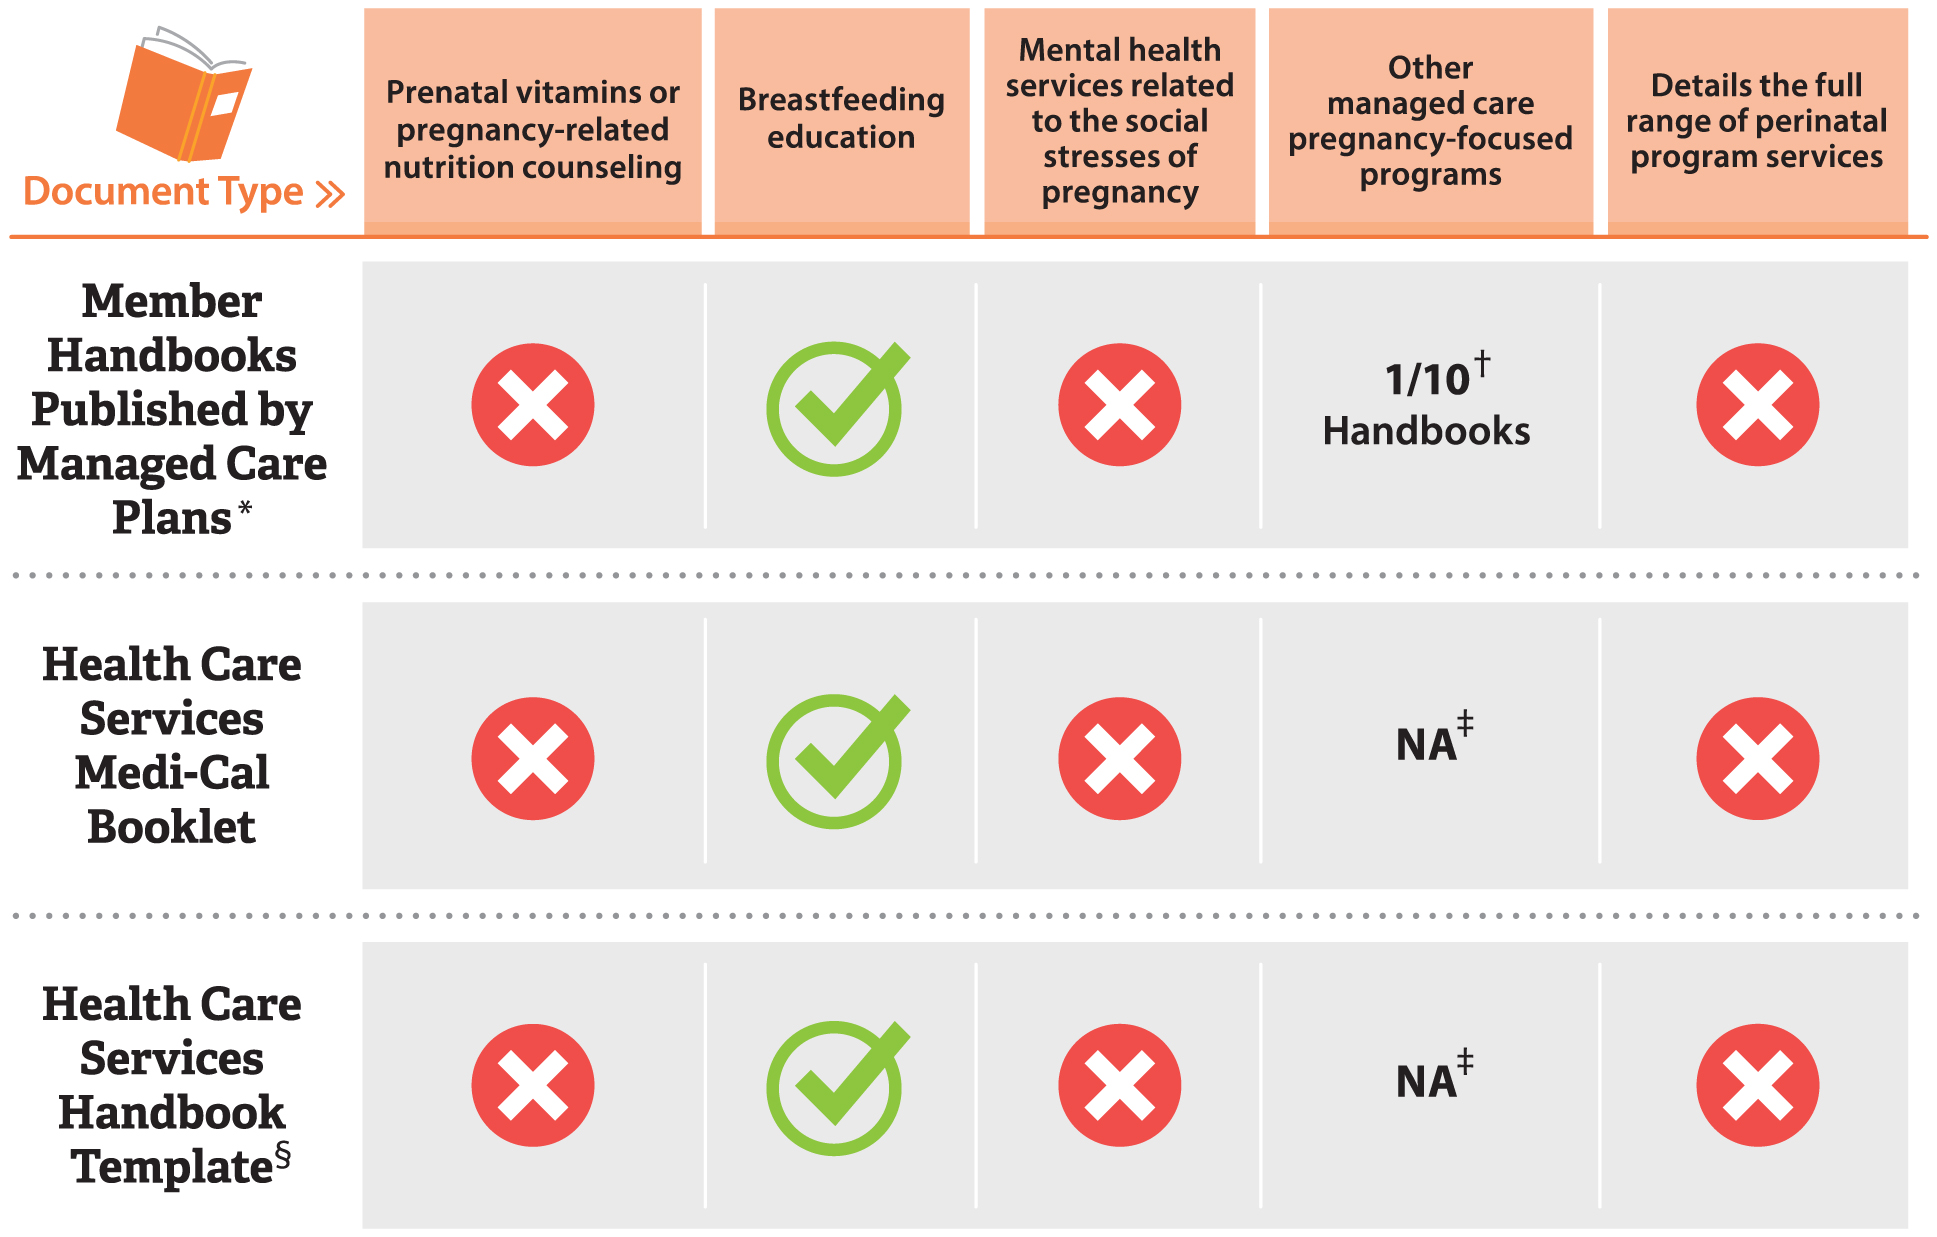 A chart showing what descriptions of services are included in different types of managed care plan and Health Care Services communication materials